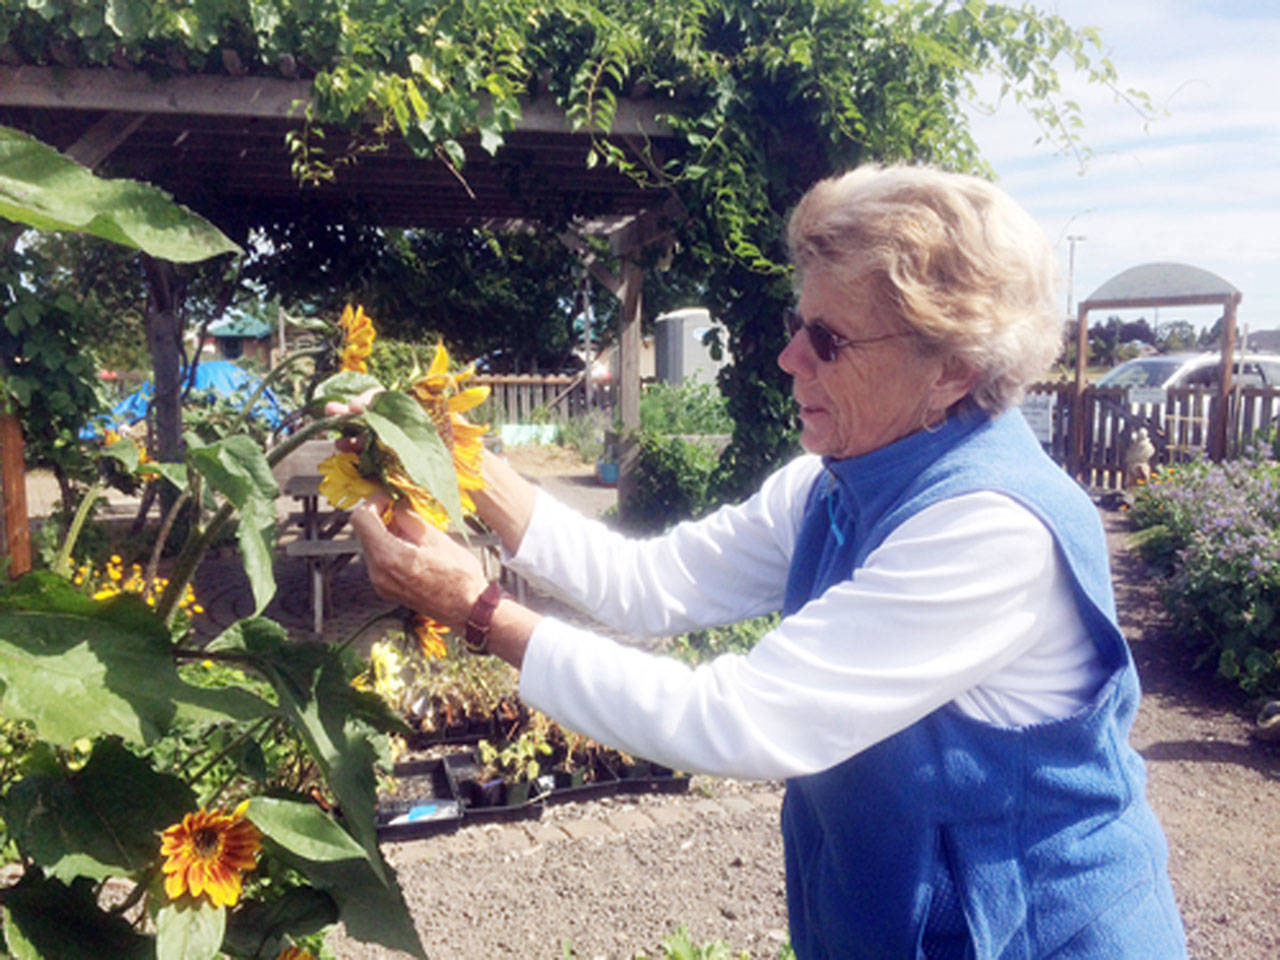 Pam Larsen leads a talk about how to keep one’s organic plantings pest-free at Nash’s Farm Store on Aug. 10.                                 Submitted photo